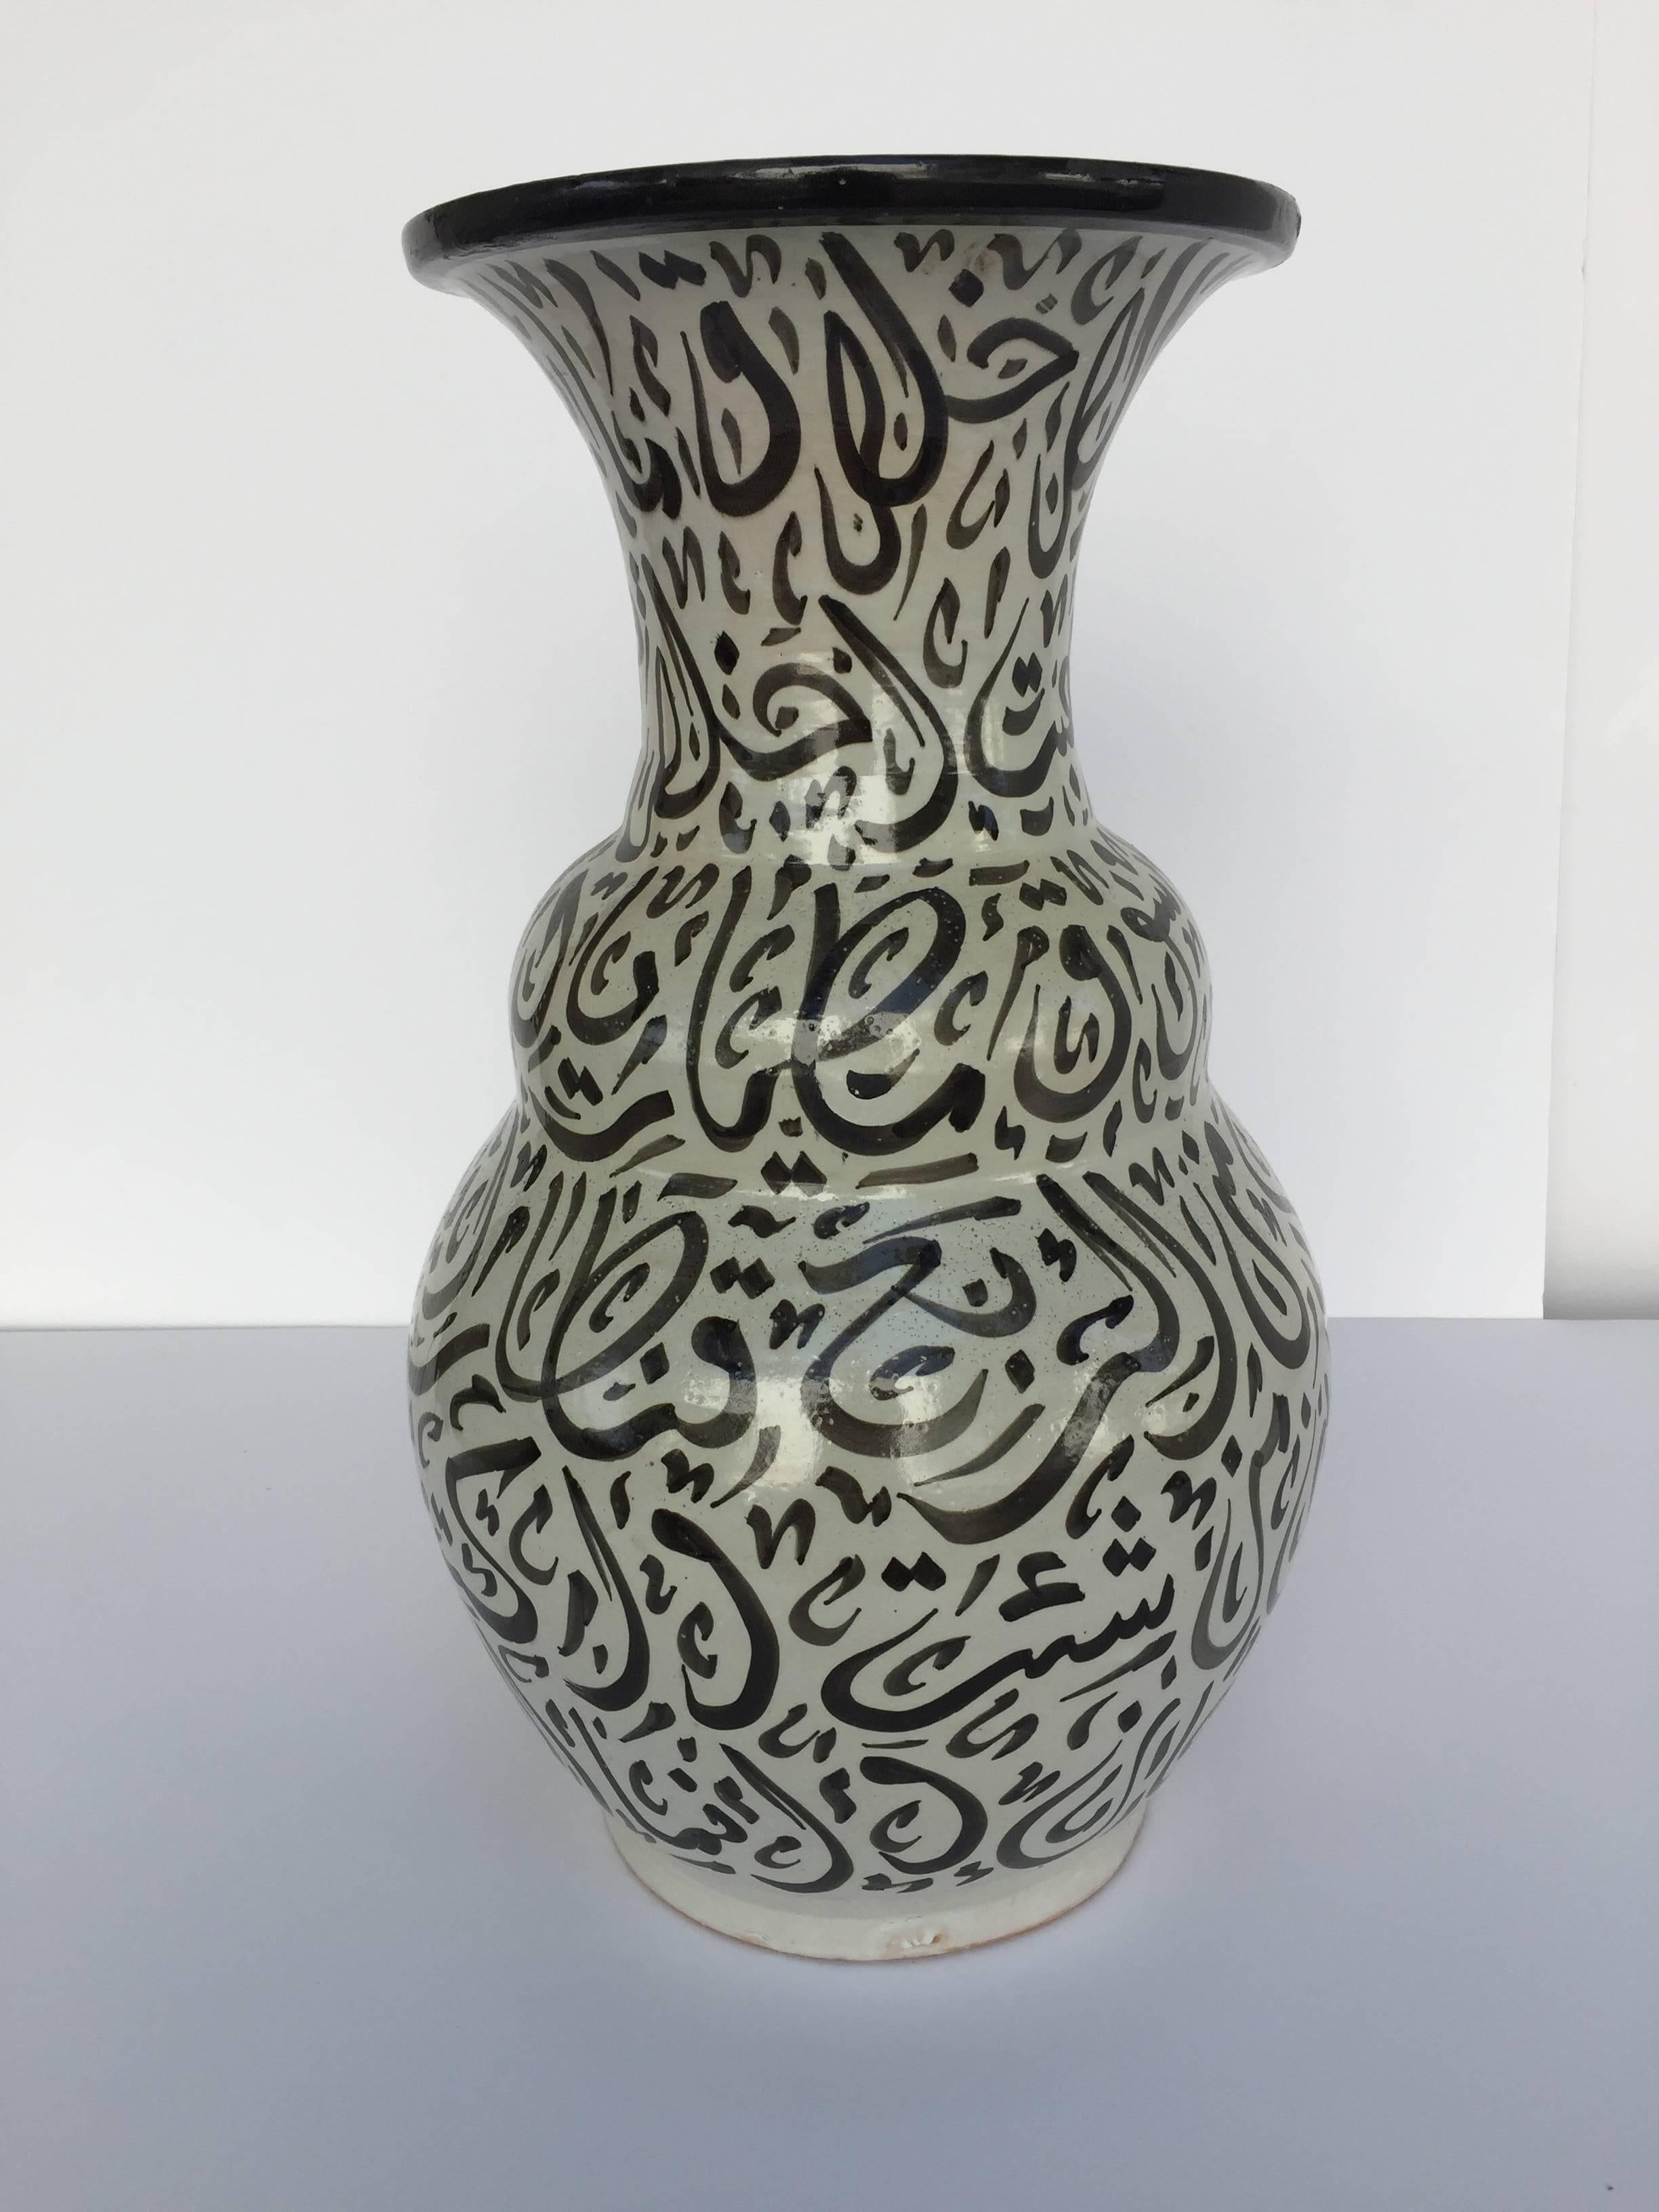 Large Moroccan glazed ceramic vase from Fez. 
Moorish style ceramic handcrafted and hand-painted with Arabic calligraphy writing.
This kind of Art Writing looks calligraphic is called Lettrism, it is a form of art that uses letters that are not